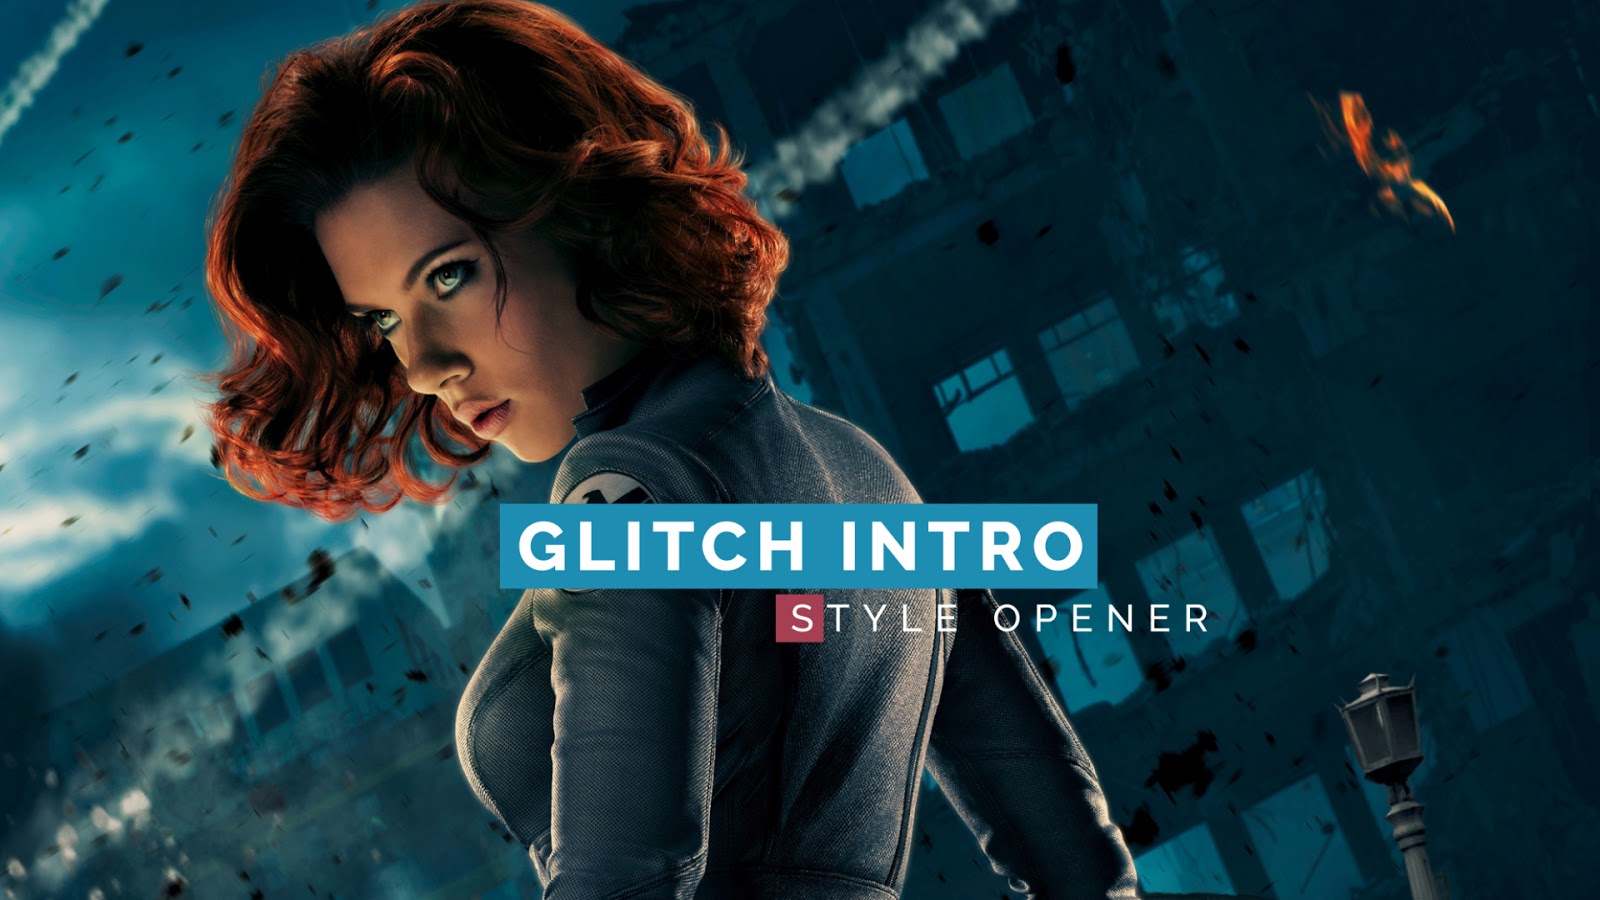 Glitch Intro - Free Download After Effects Templates. - mega graphic